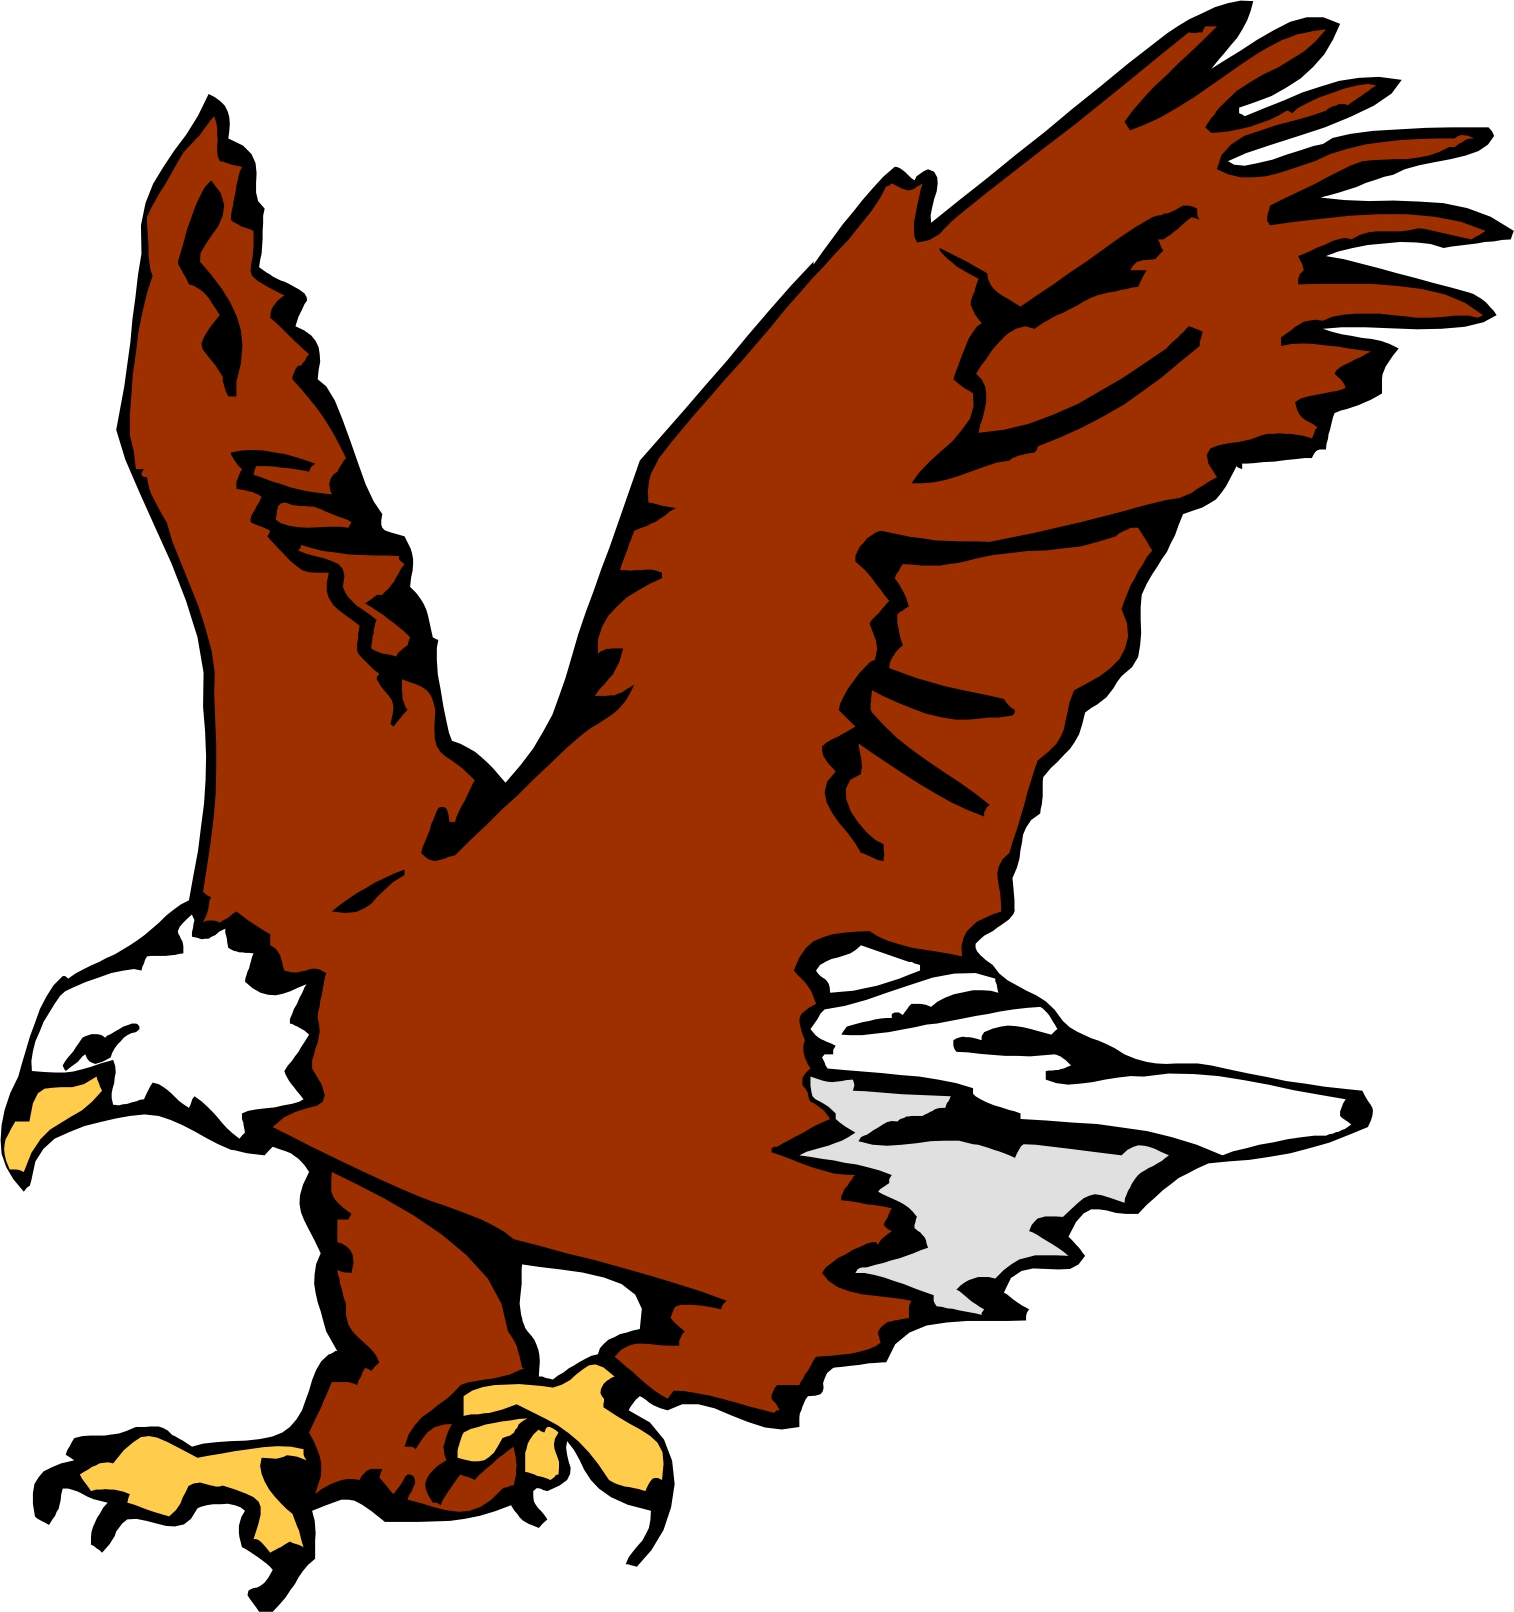 Eagle Cartoon Images - Clipart library